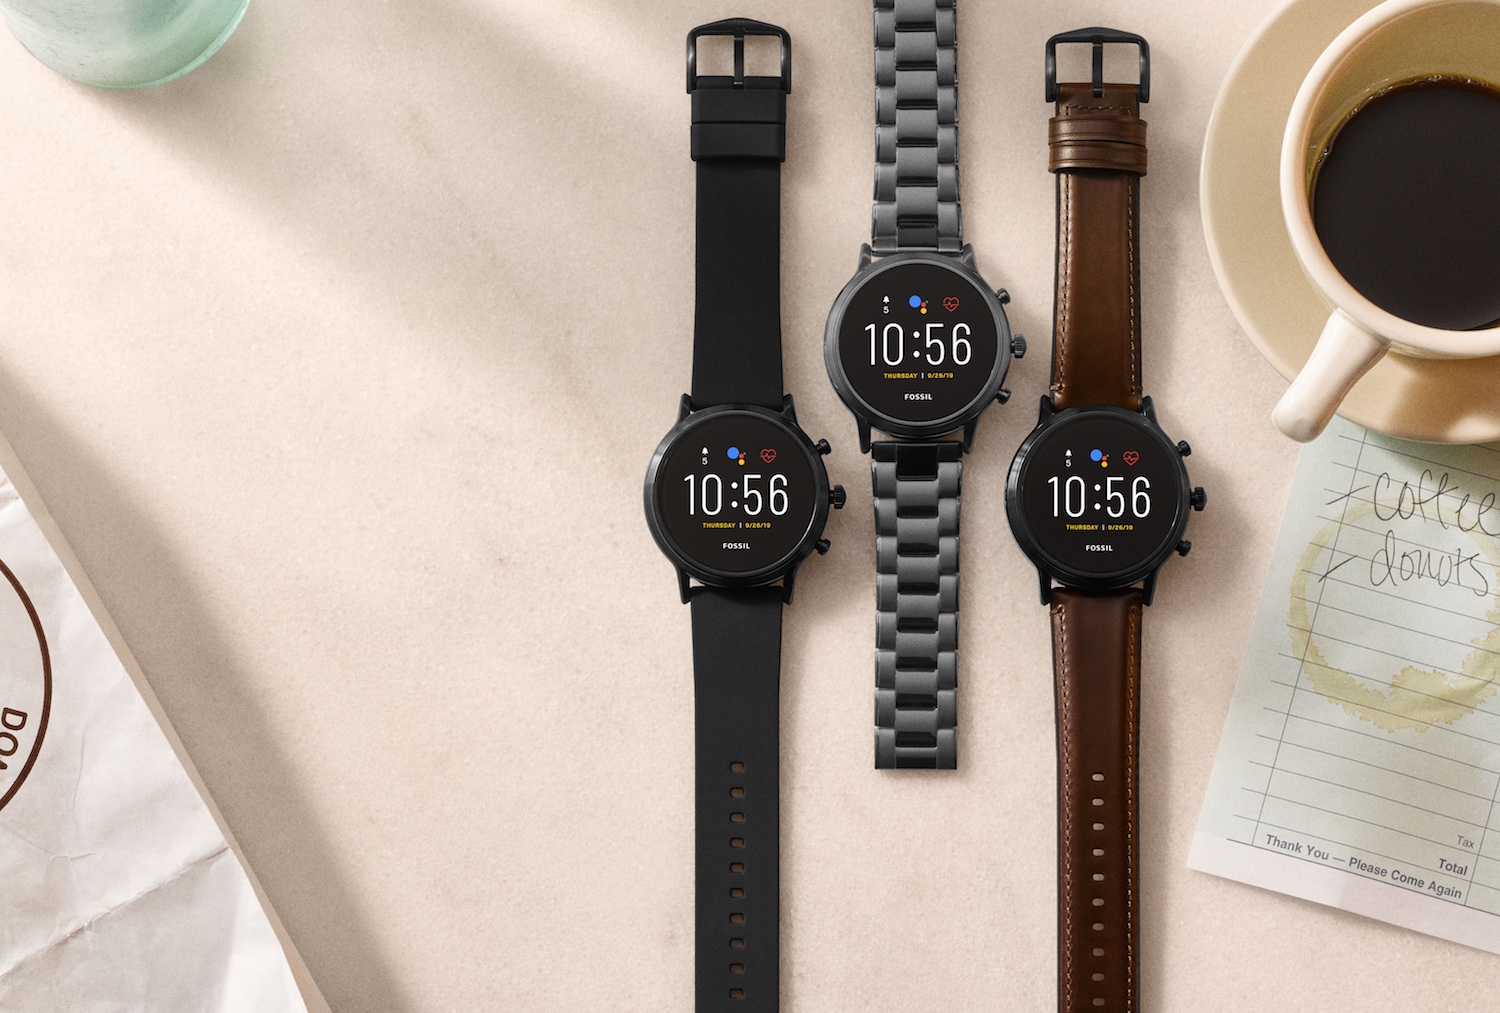 New Fossil Smartwatch Has Longer Battery Life, Better iPhone Support